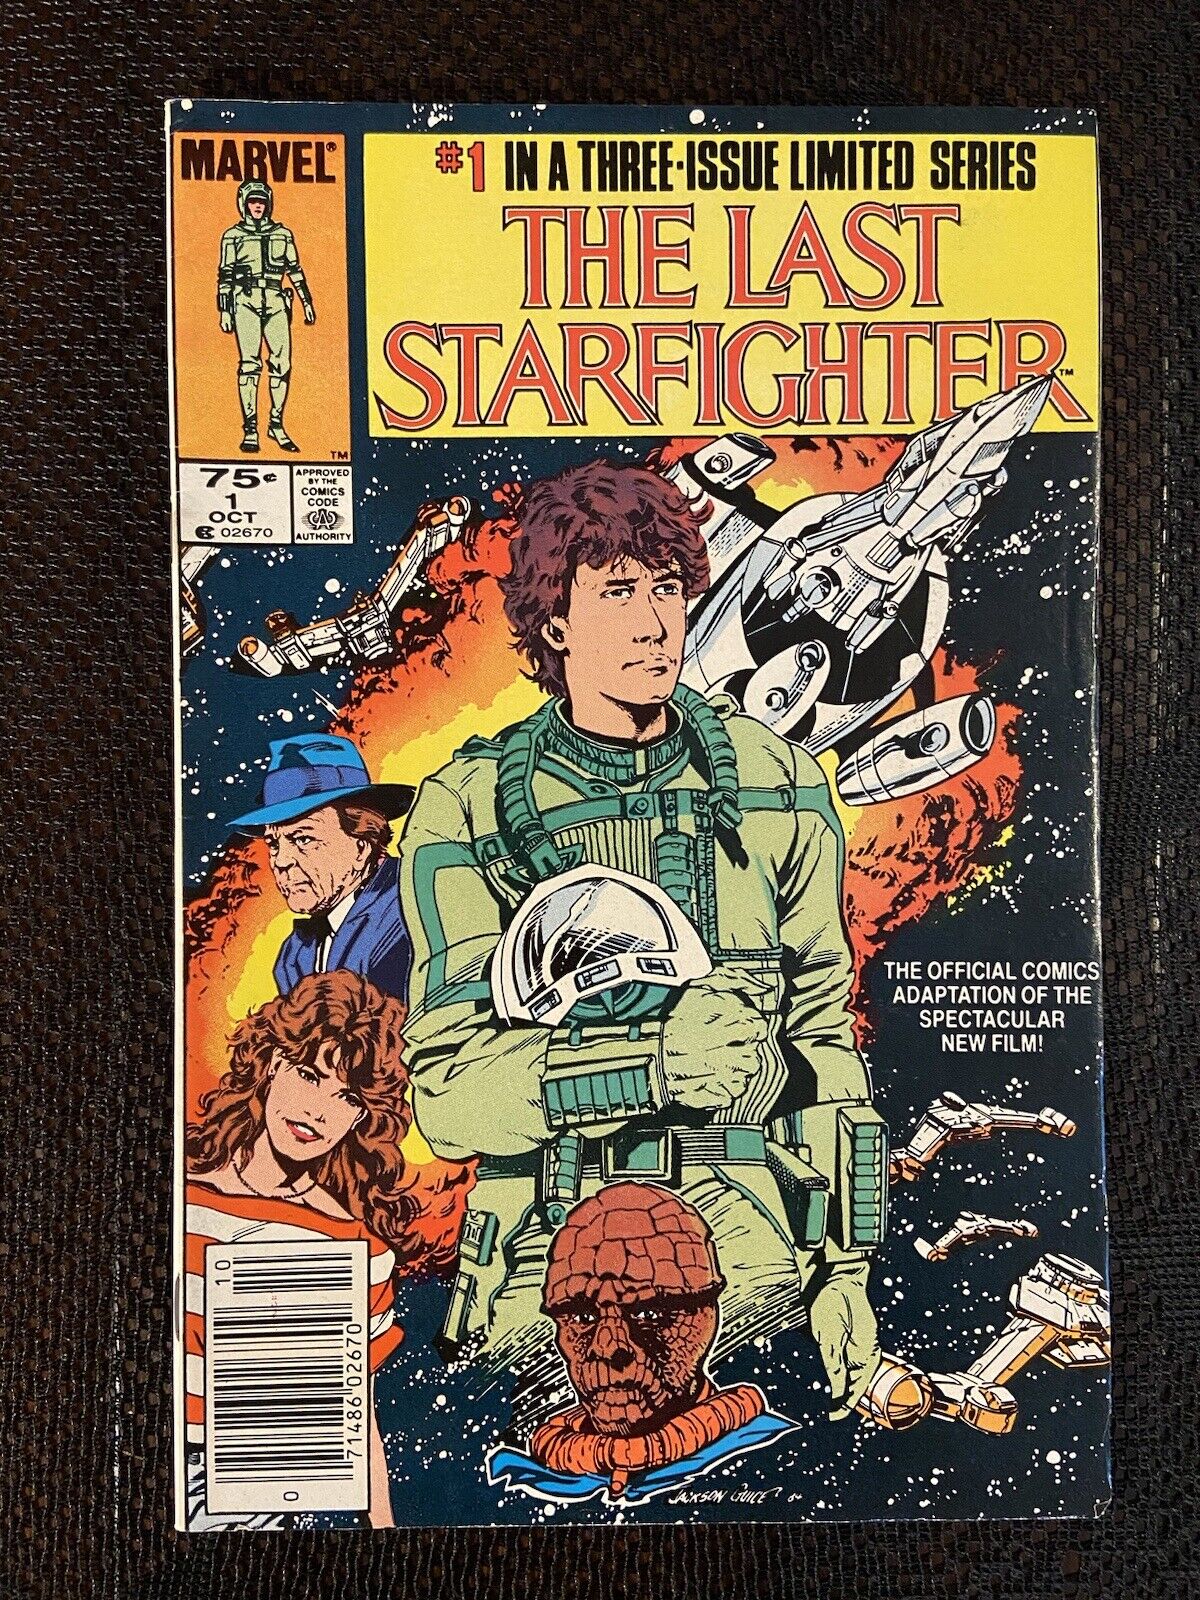 THE LAST STARFIGHTER #1 (1984) MARVEL MOVIE ADAPTATION OF THE 80’S CLASSIC